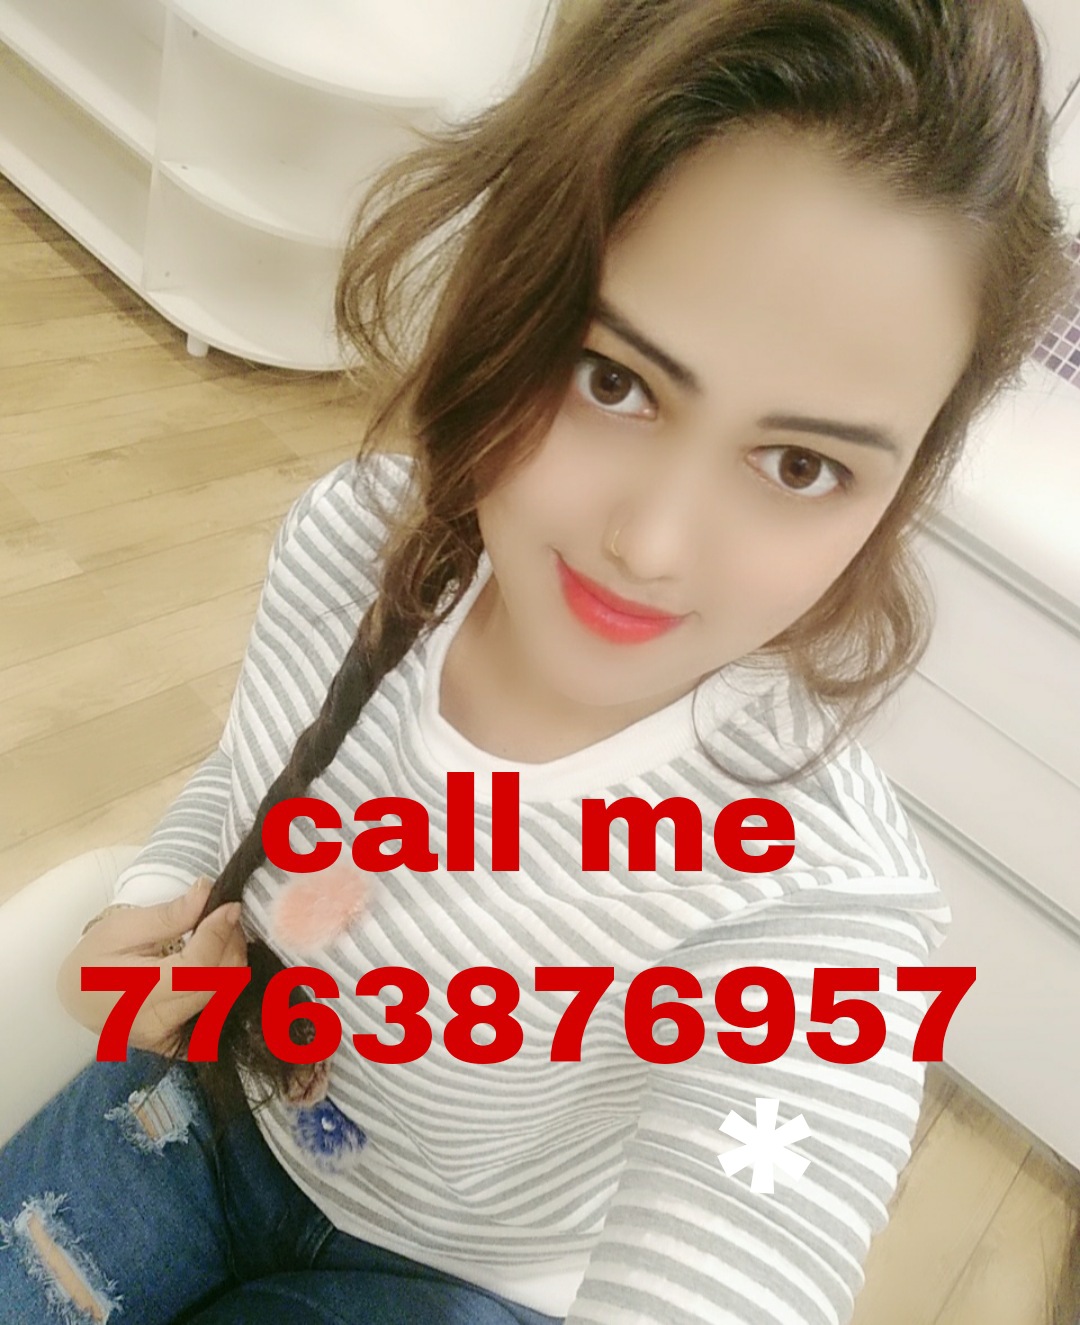 ELECTRONIC CITY CALL GIRL LOW PRICE CASH PAYMENT SERVICE AVAILABLE 